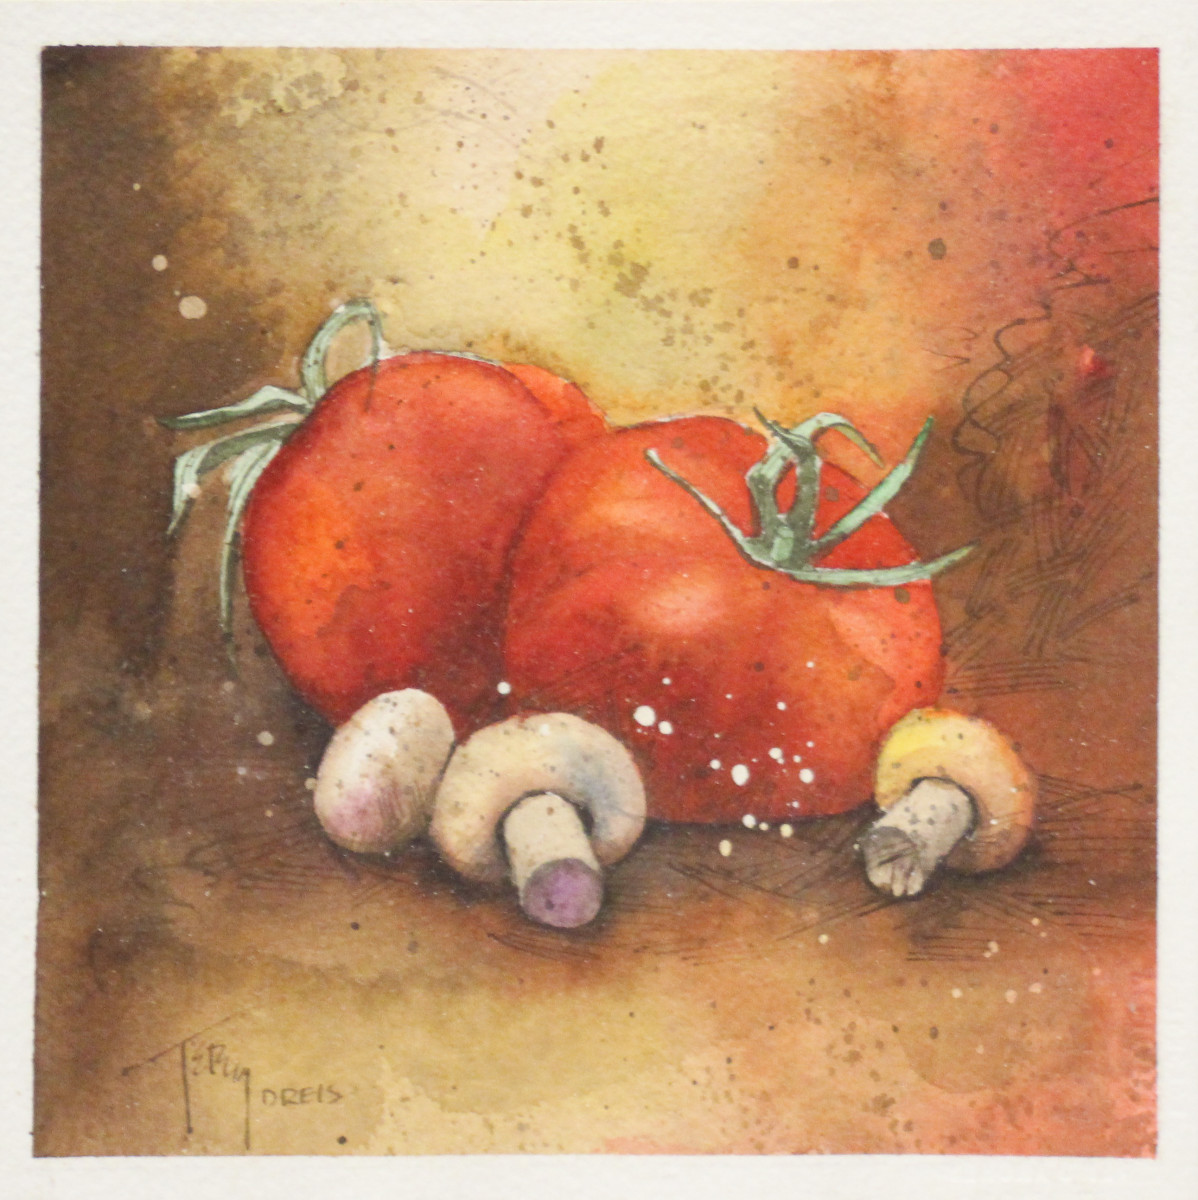 Tomatoes and Mushrooms by Terry Dreis 